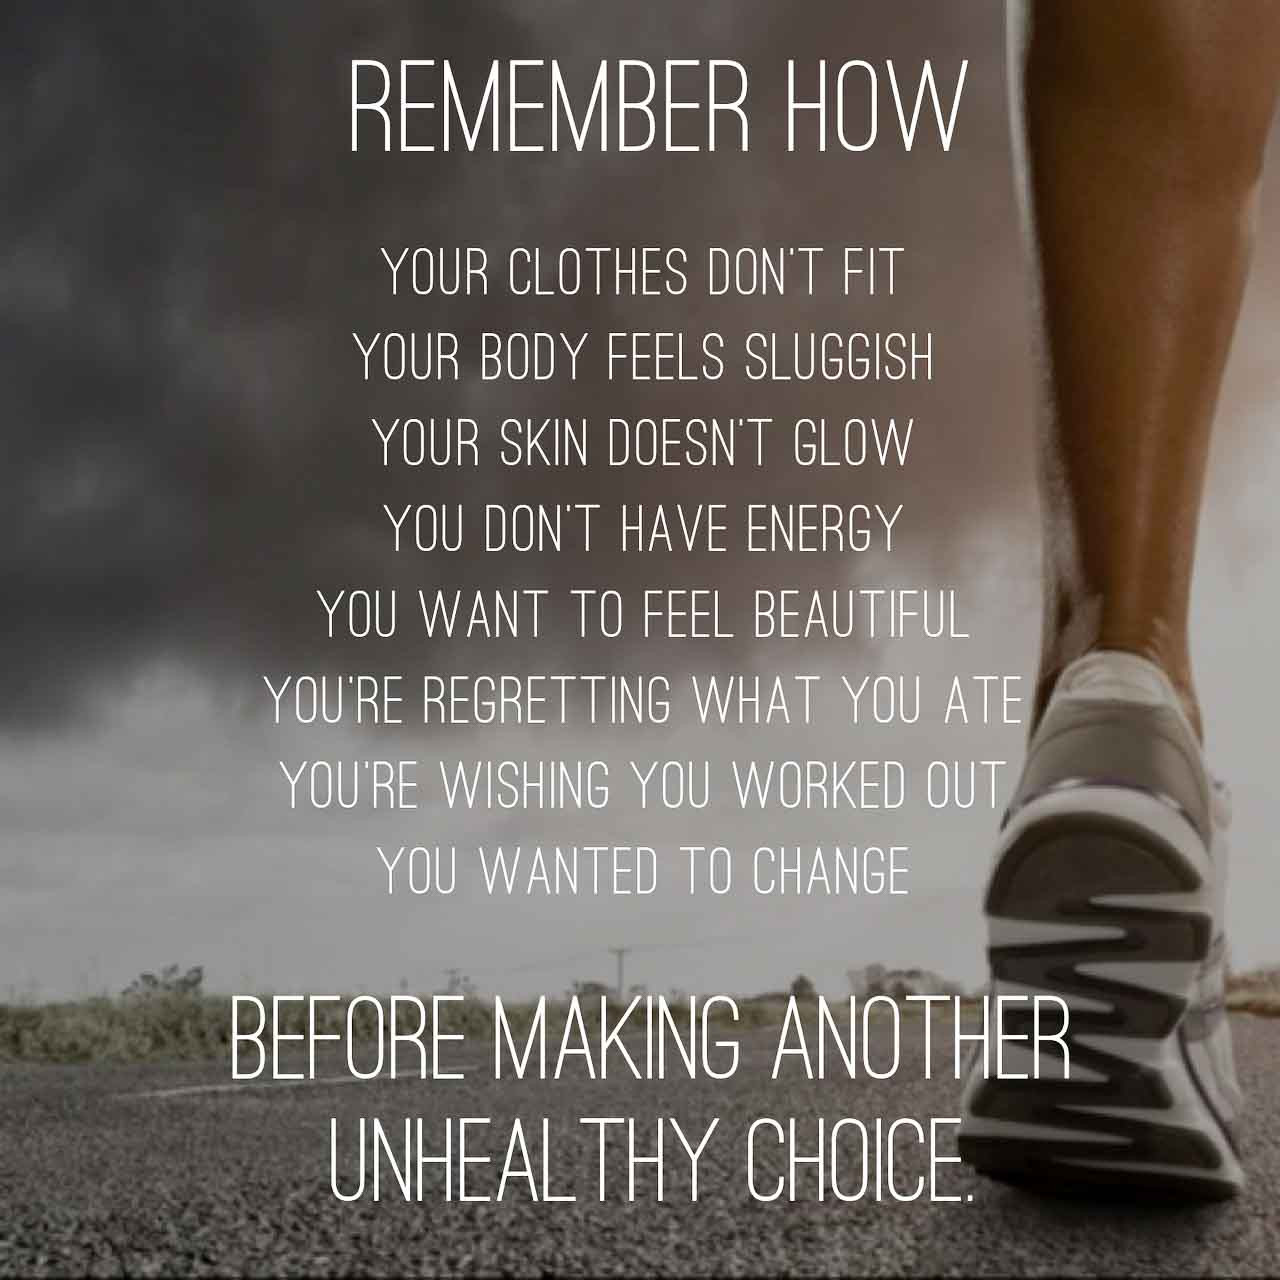 Positive Workout Quotes
 Get inspired with these motivational workout quotes